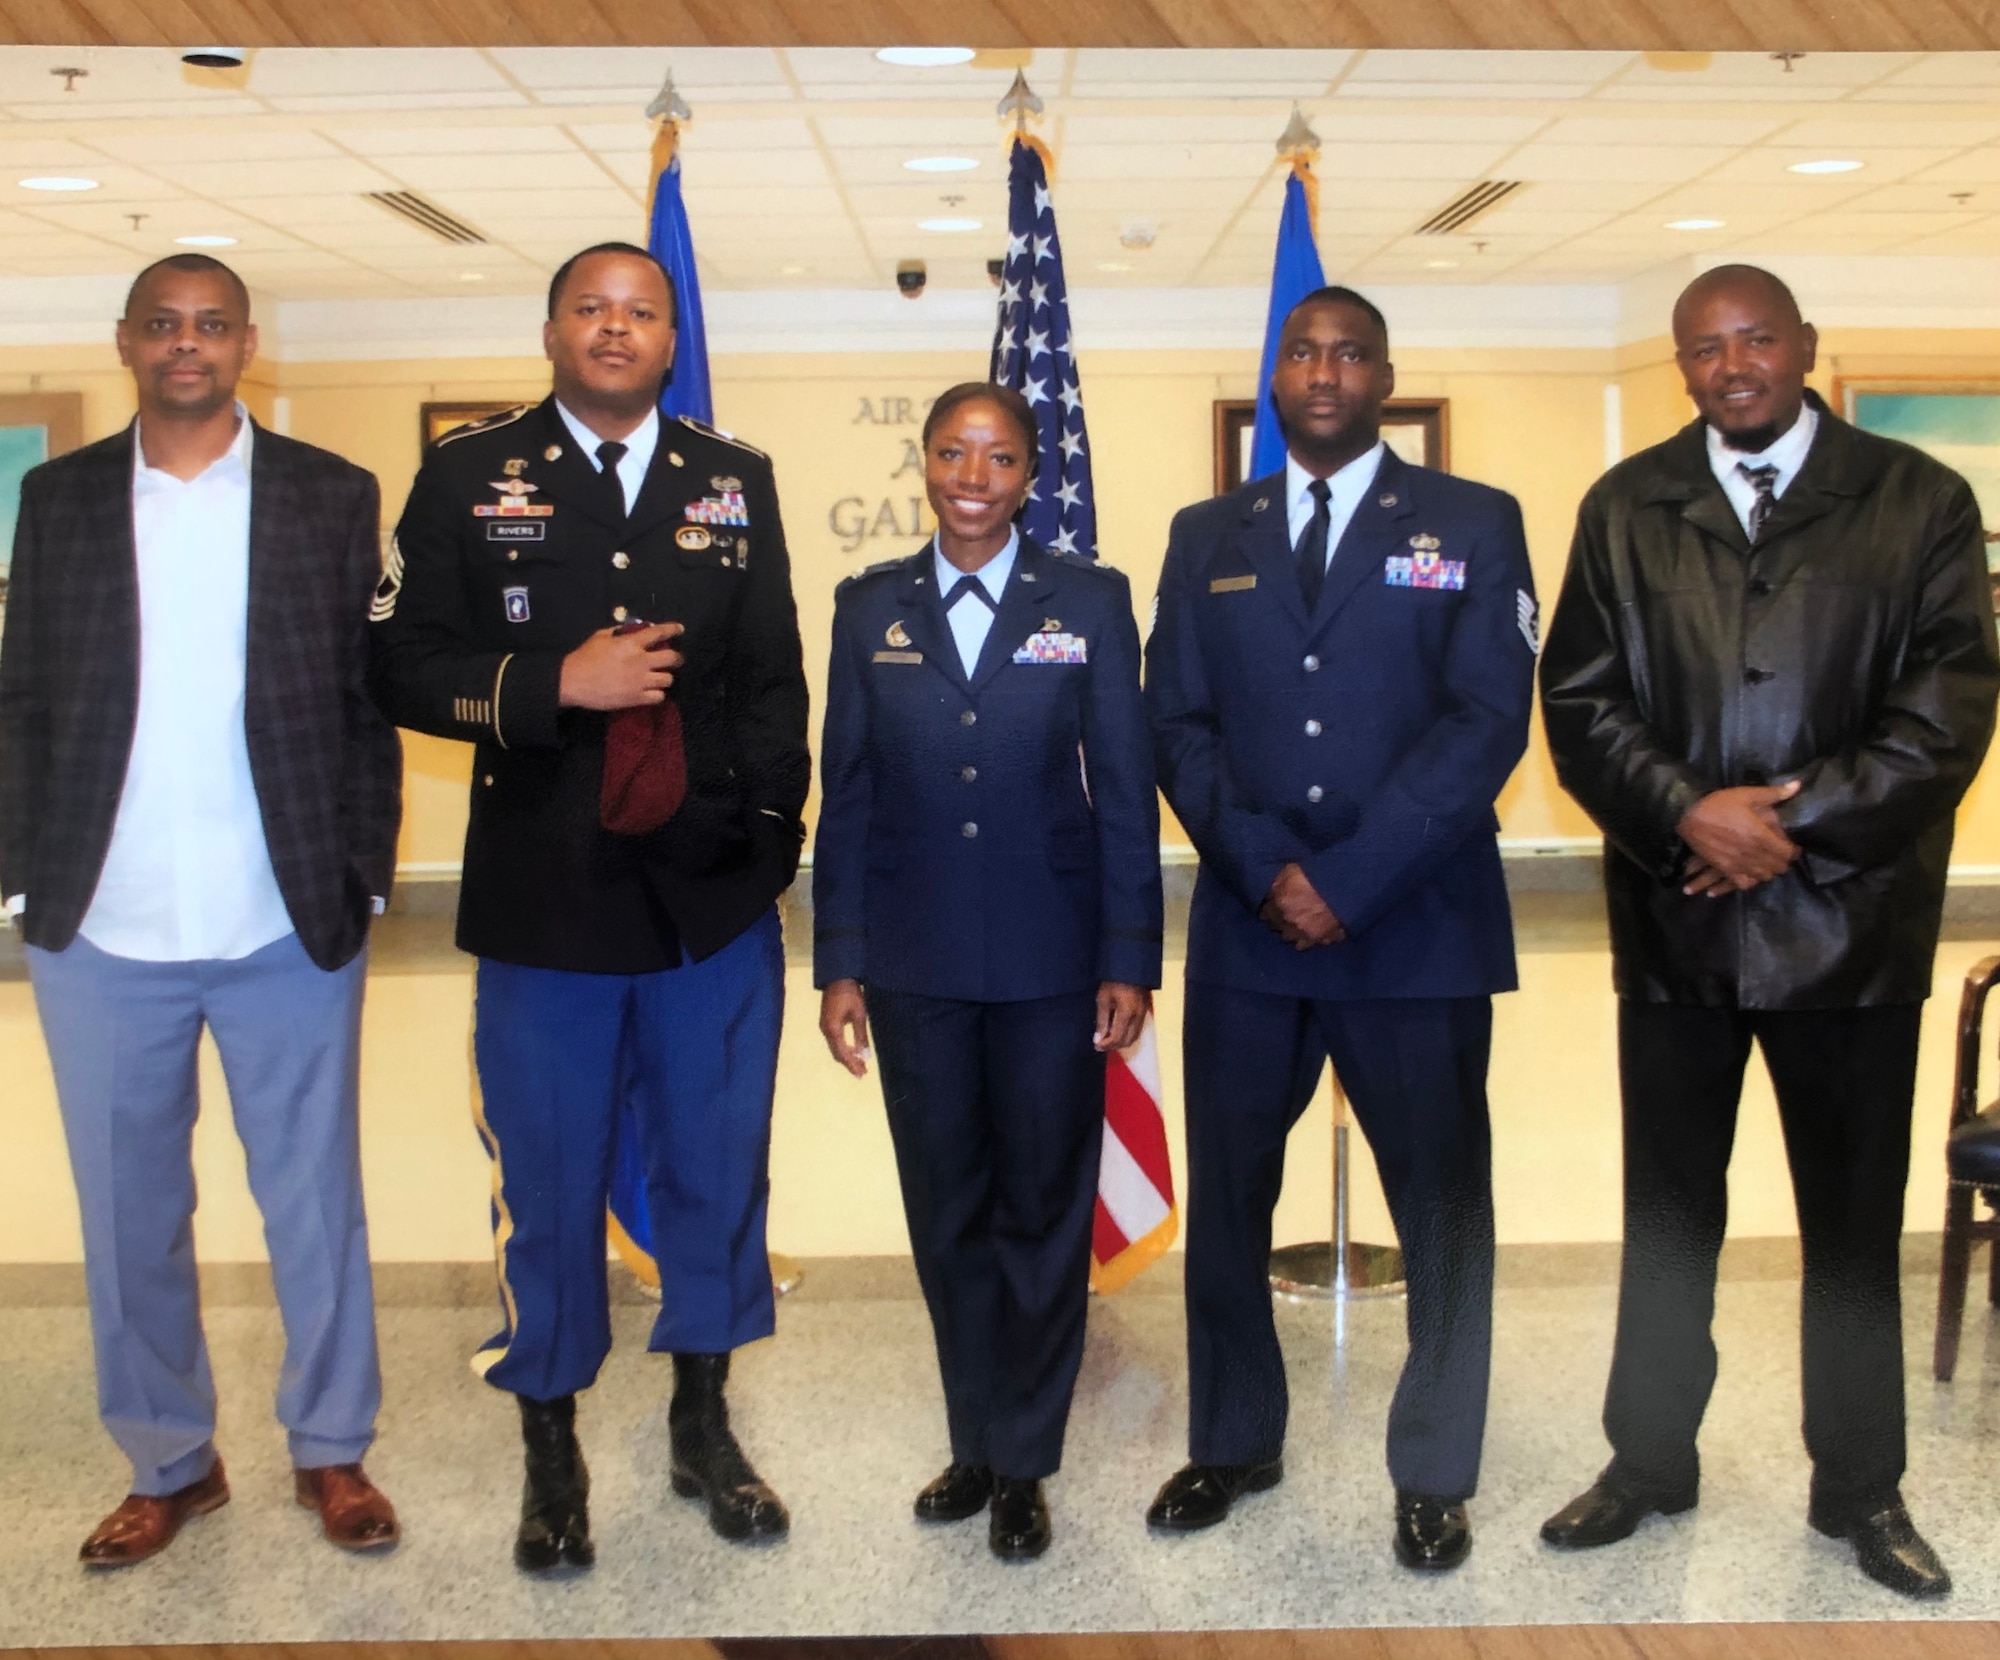 Lt. Col. Miriam Carter poses for a photo with her brothers (from left to right) Gerod Baldeo, MSG Ephraim Rivers, TSgt Collinsworth Ayers and Solomon Rivers during her promotion ceremony at the Pentagon, September 2018. (Courtesy Photo)